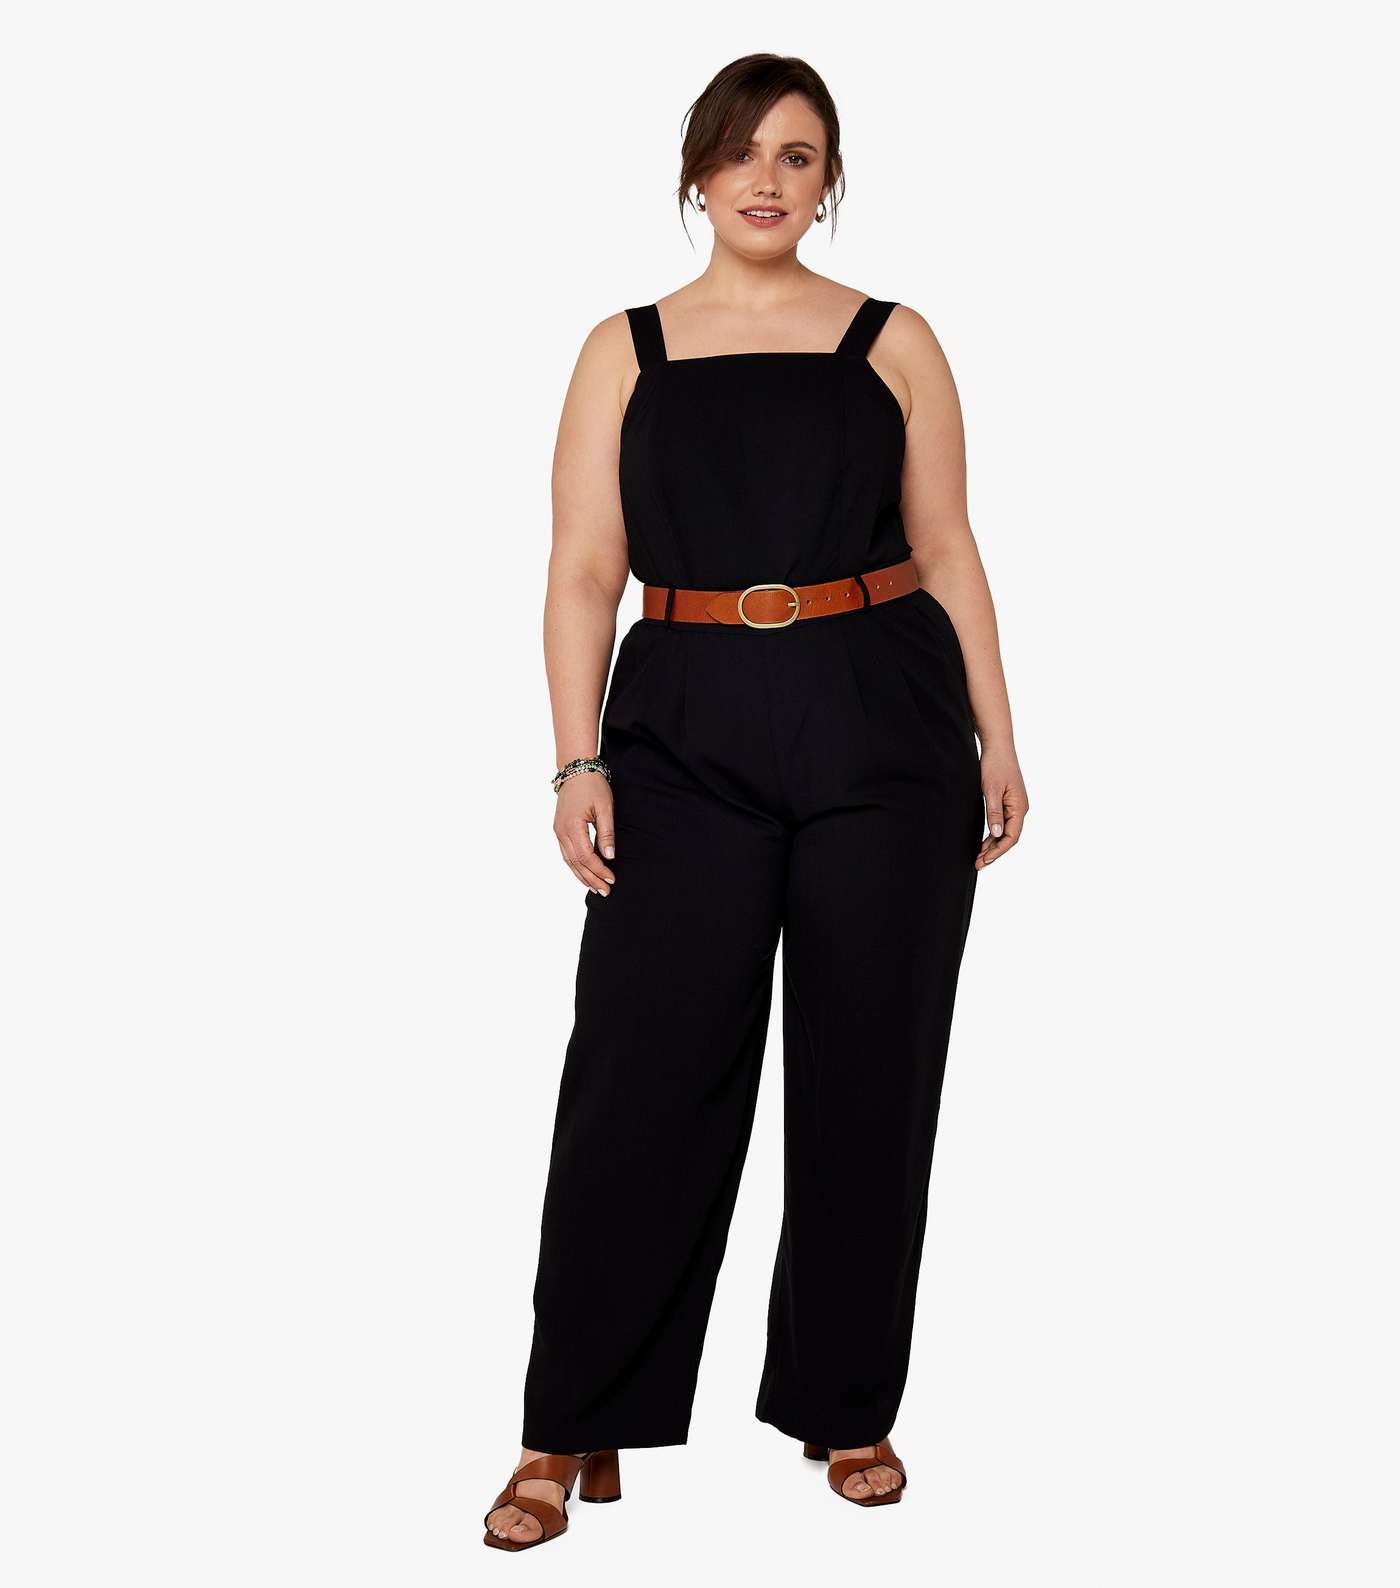 Apricot Curves Black Strappy Dungaree Jumpsuit Image 5